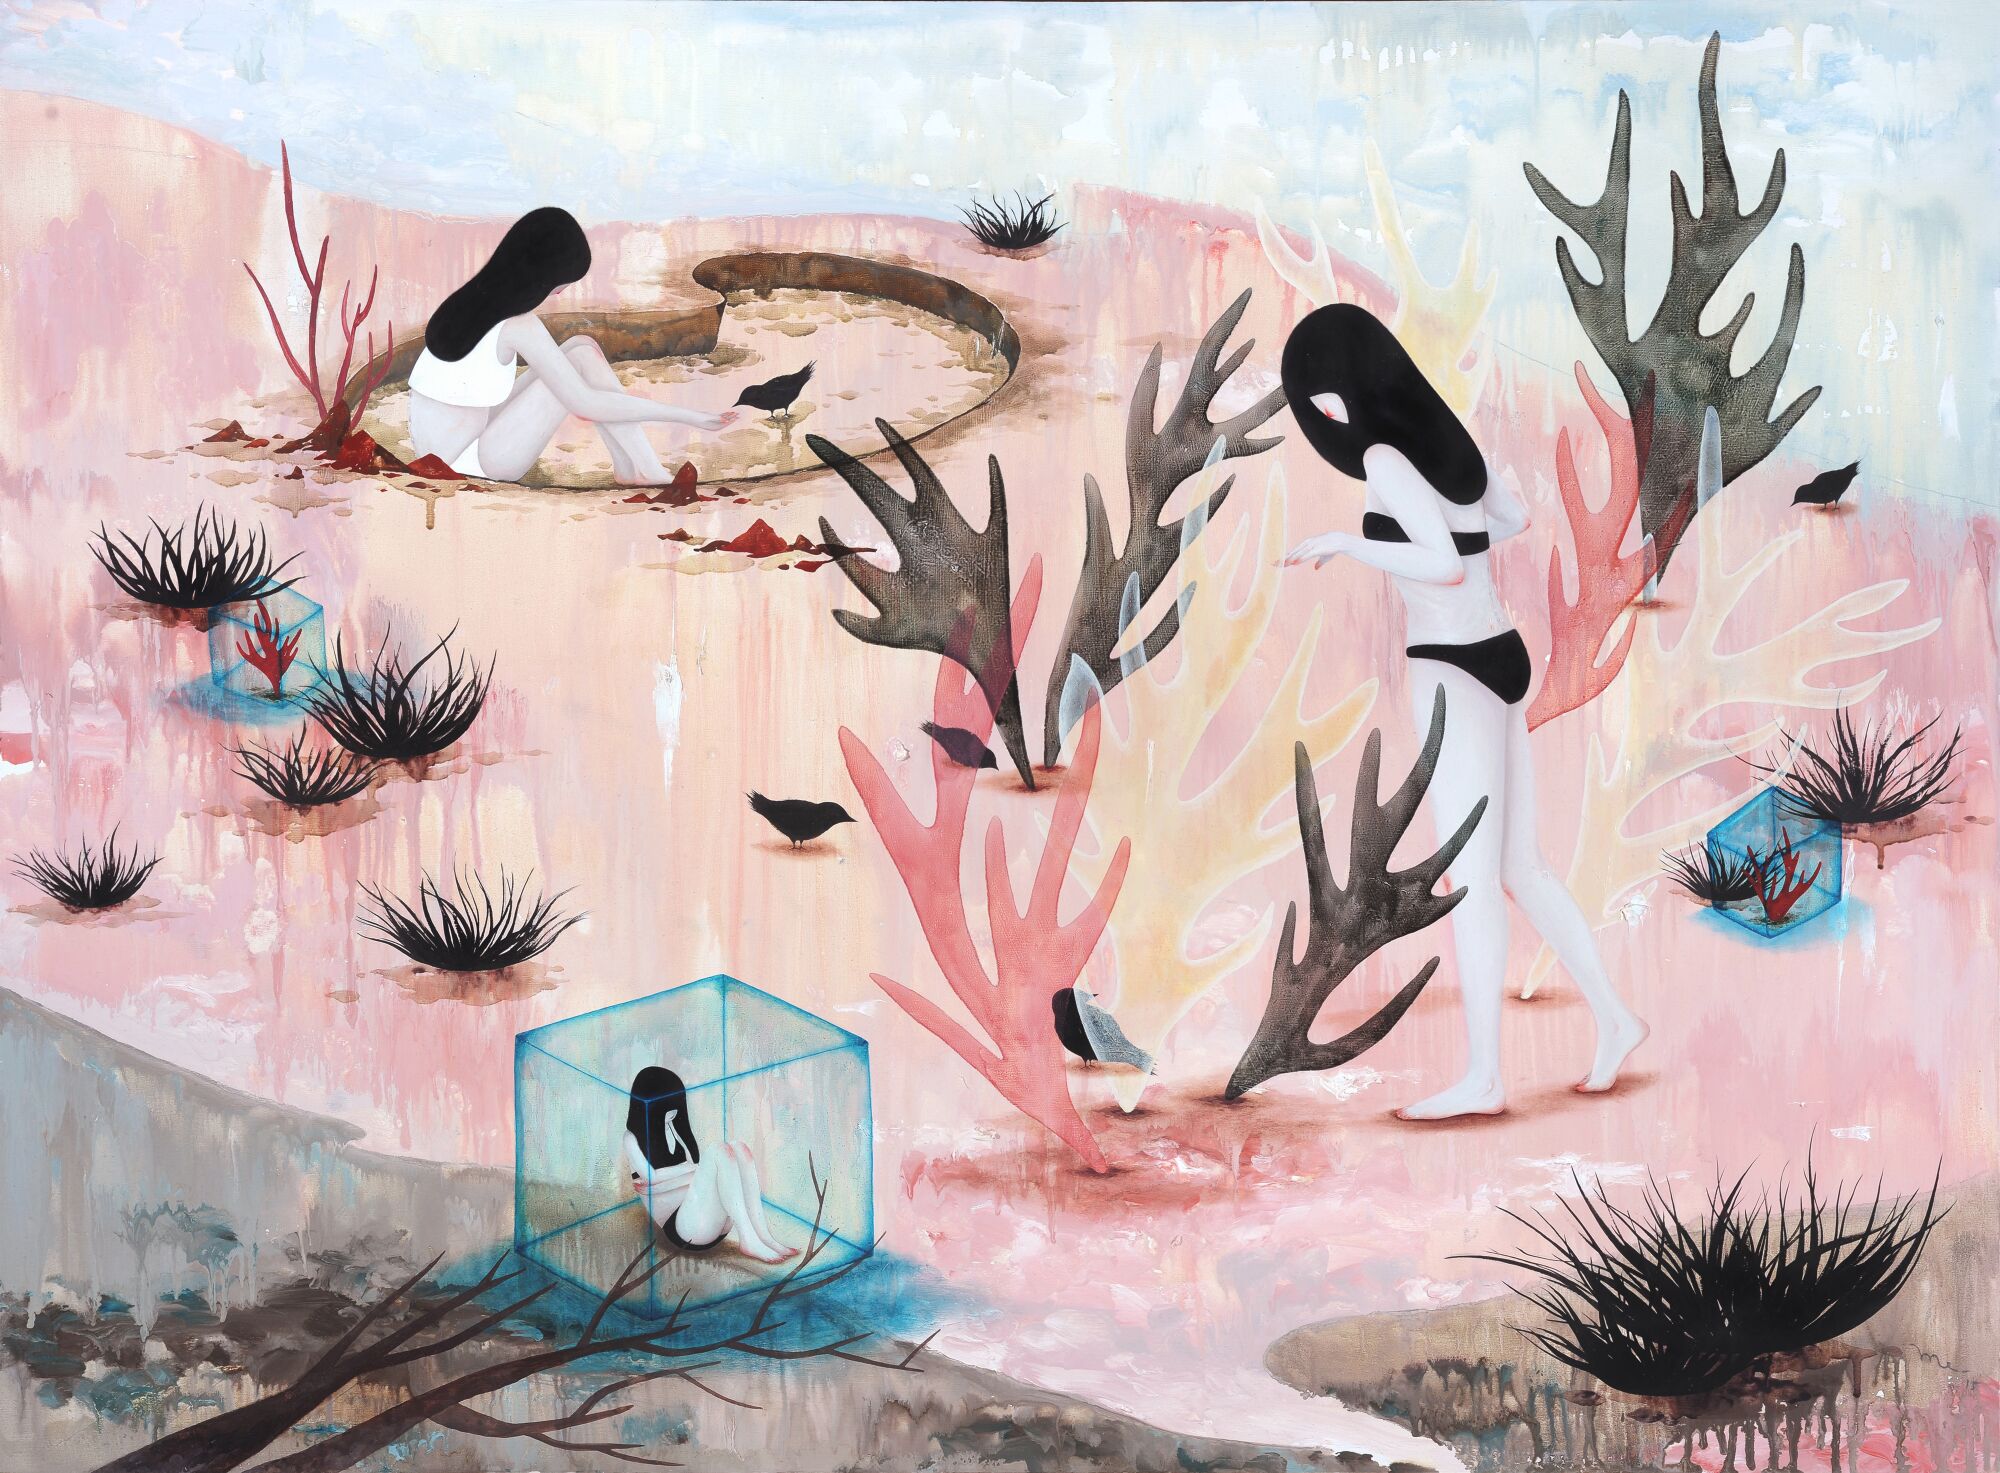 "Finding Myself" by Mandy Cao is a part of an exhibit at Oceanside Museum of Art titled "A Kind of Heaven."